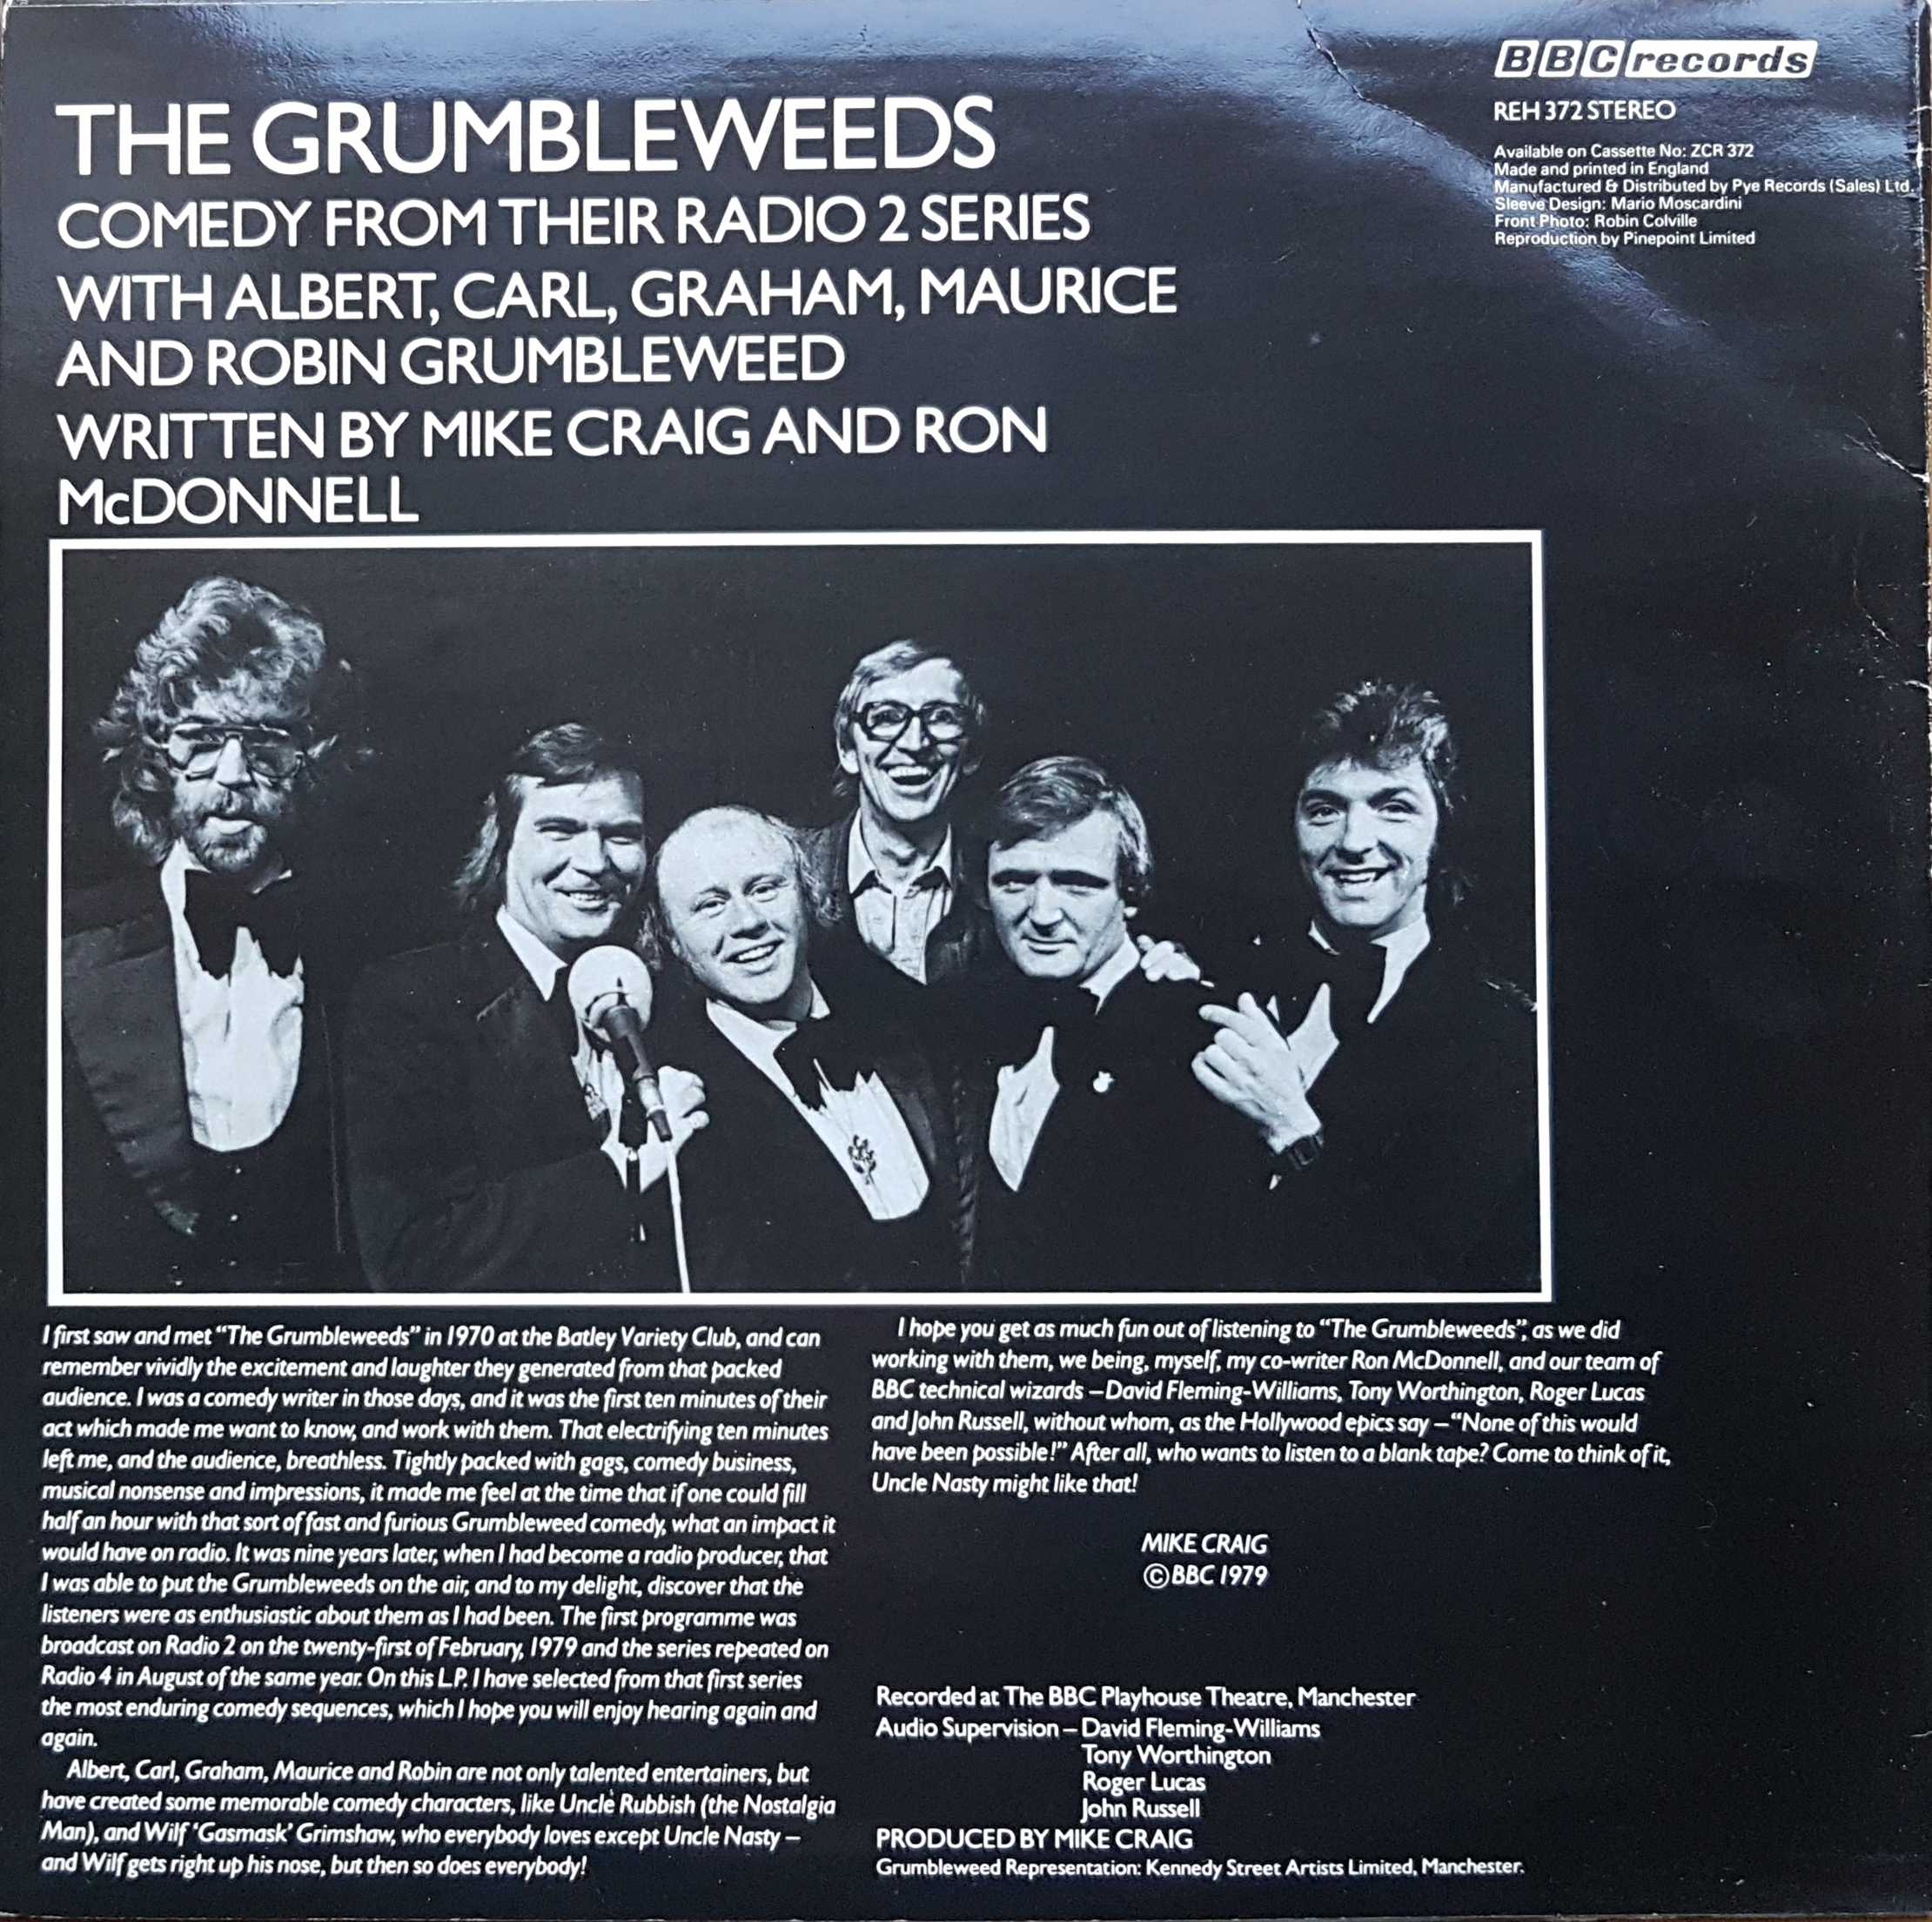 Picture of REH 372 The Grumbleweeds by artist Mike Craig / Ron McDonnell from the BBC records and Tapes library